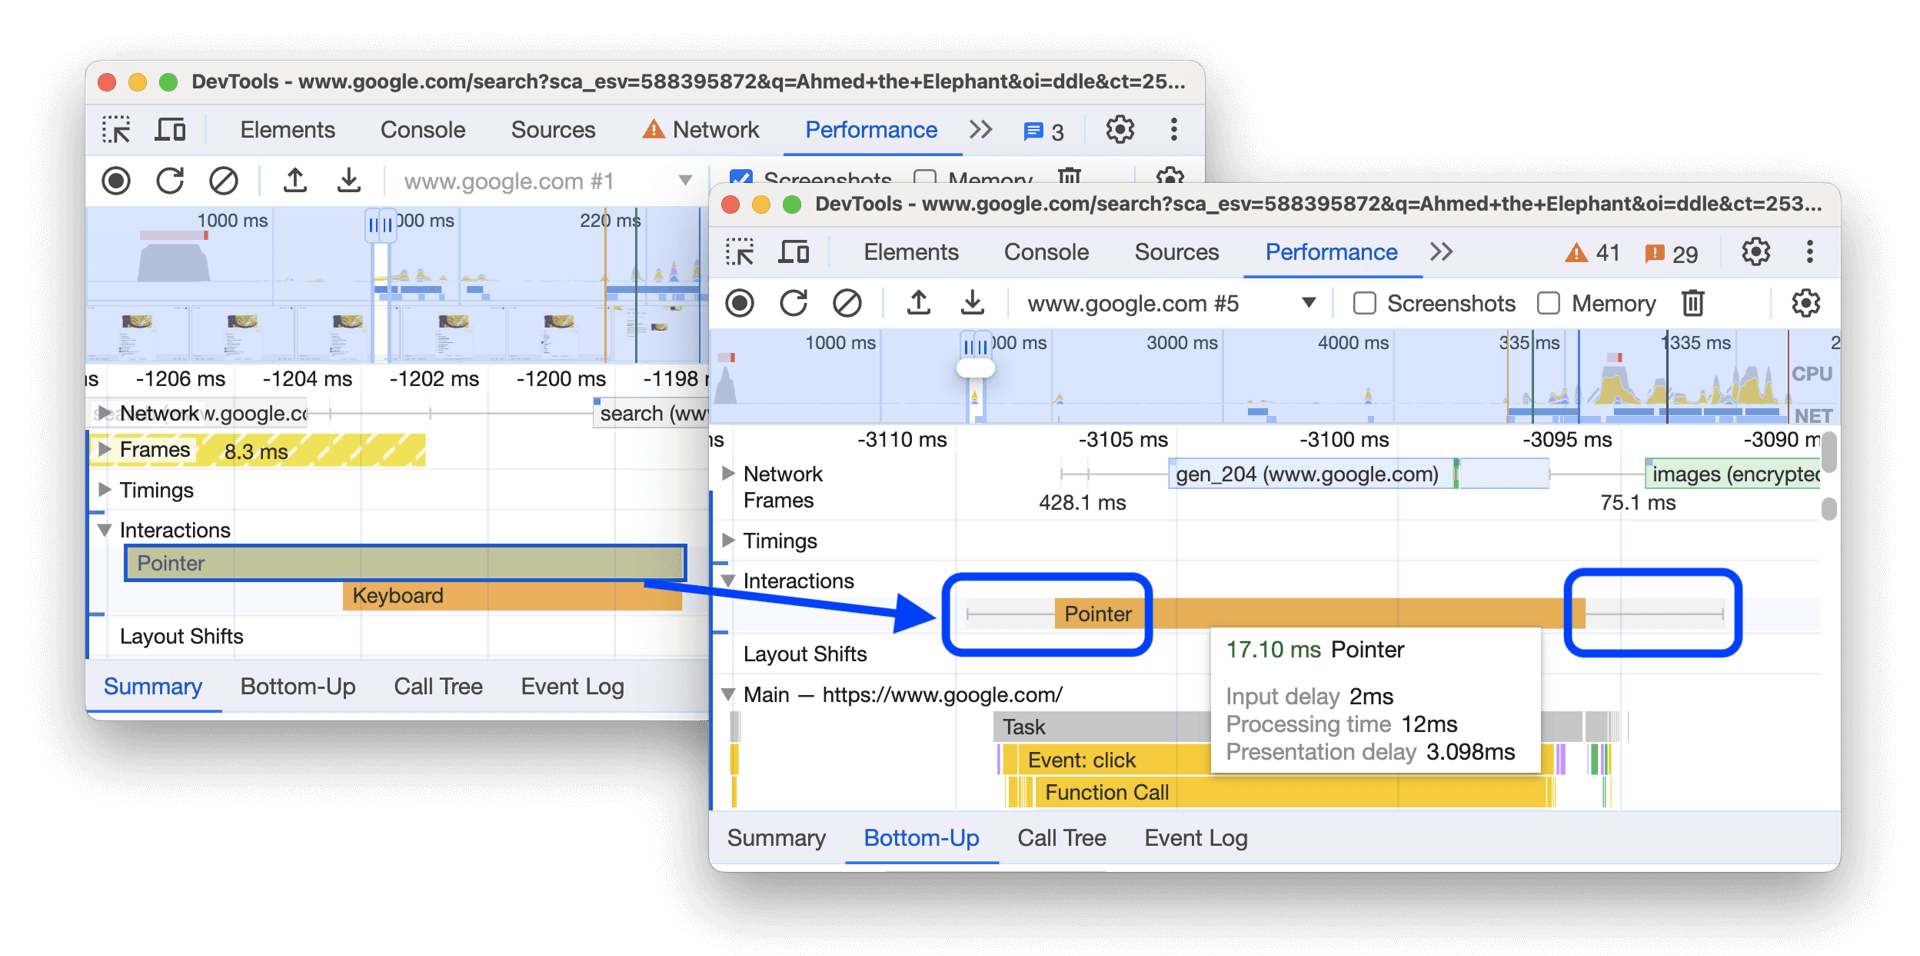 Chrome 121 and subsequent versions have significantly improved understanding of interactions and the resulting tasks in the CPU thread